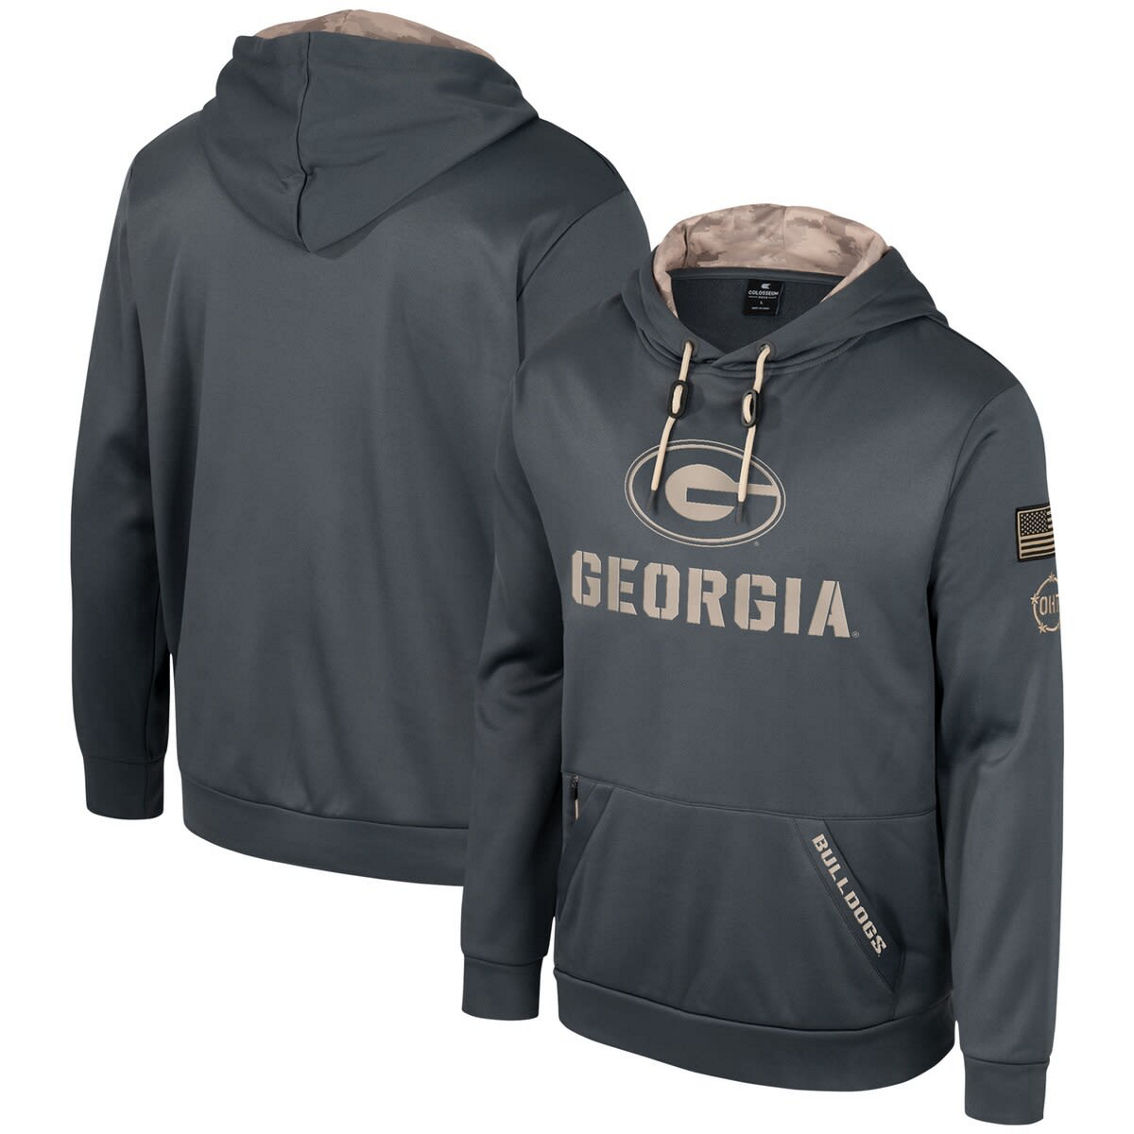 Colosseum Men's Charcoal Georgia Bulldogs OHT Military Appreciation Pullover Hoodie - Image 2 of 4